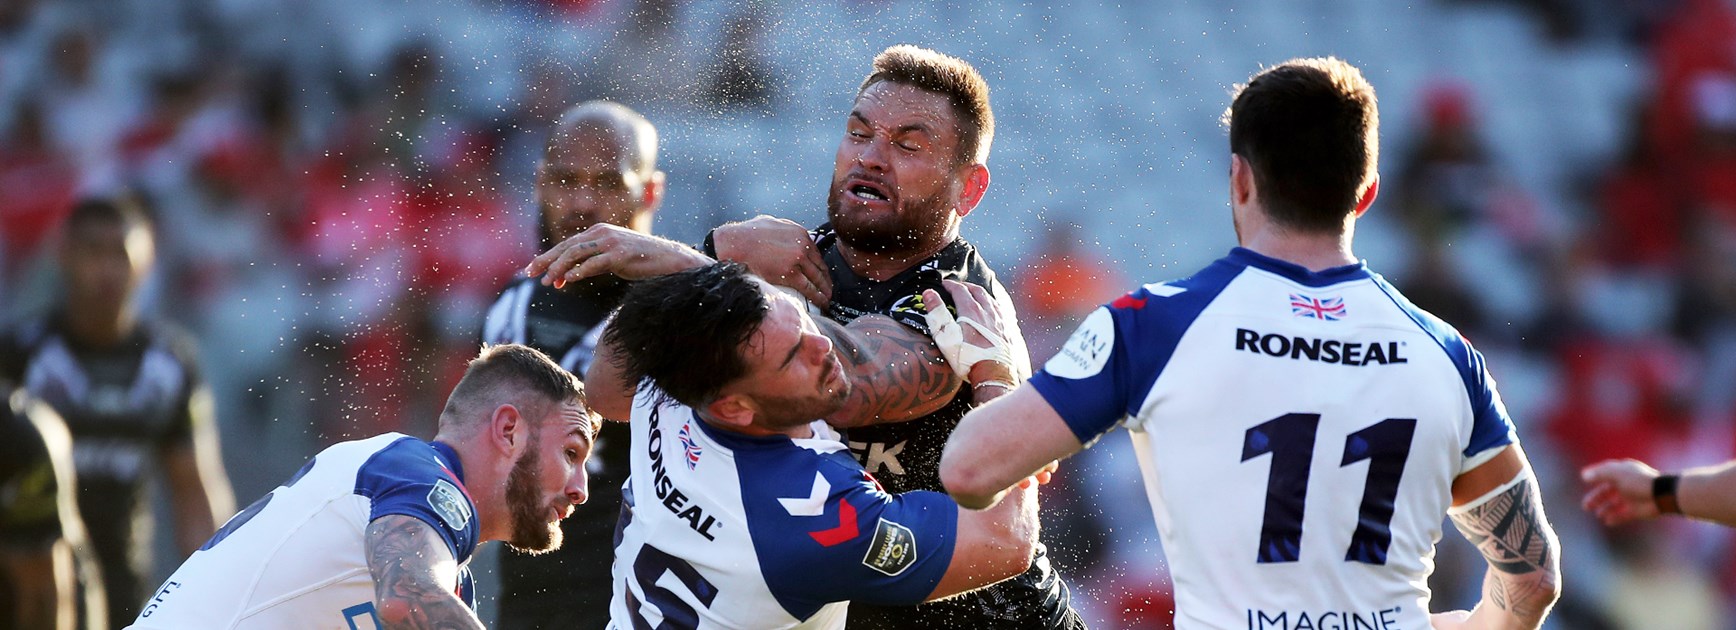 New Zealand Kiwis v Great Britain Lions preview